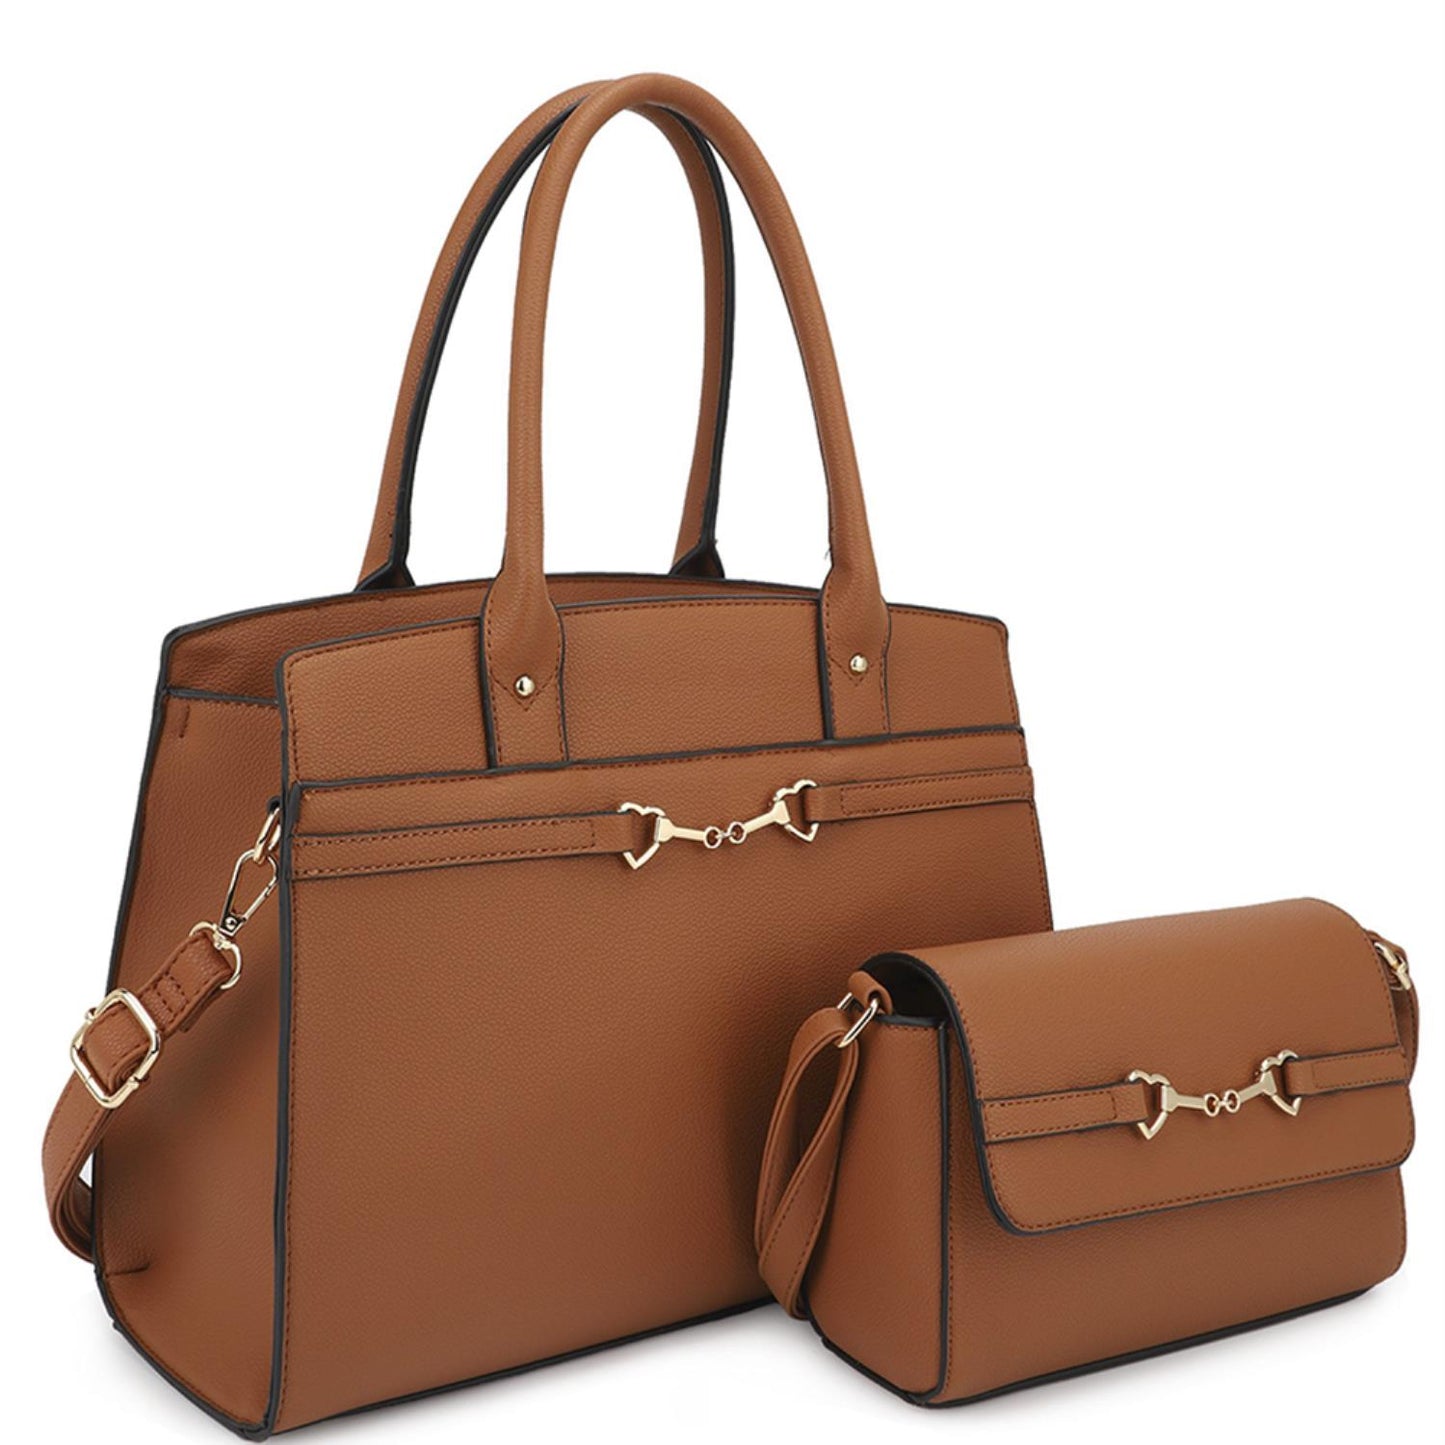 2-in-1 Matching Satchel With Crossbody Bag